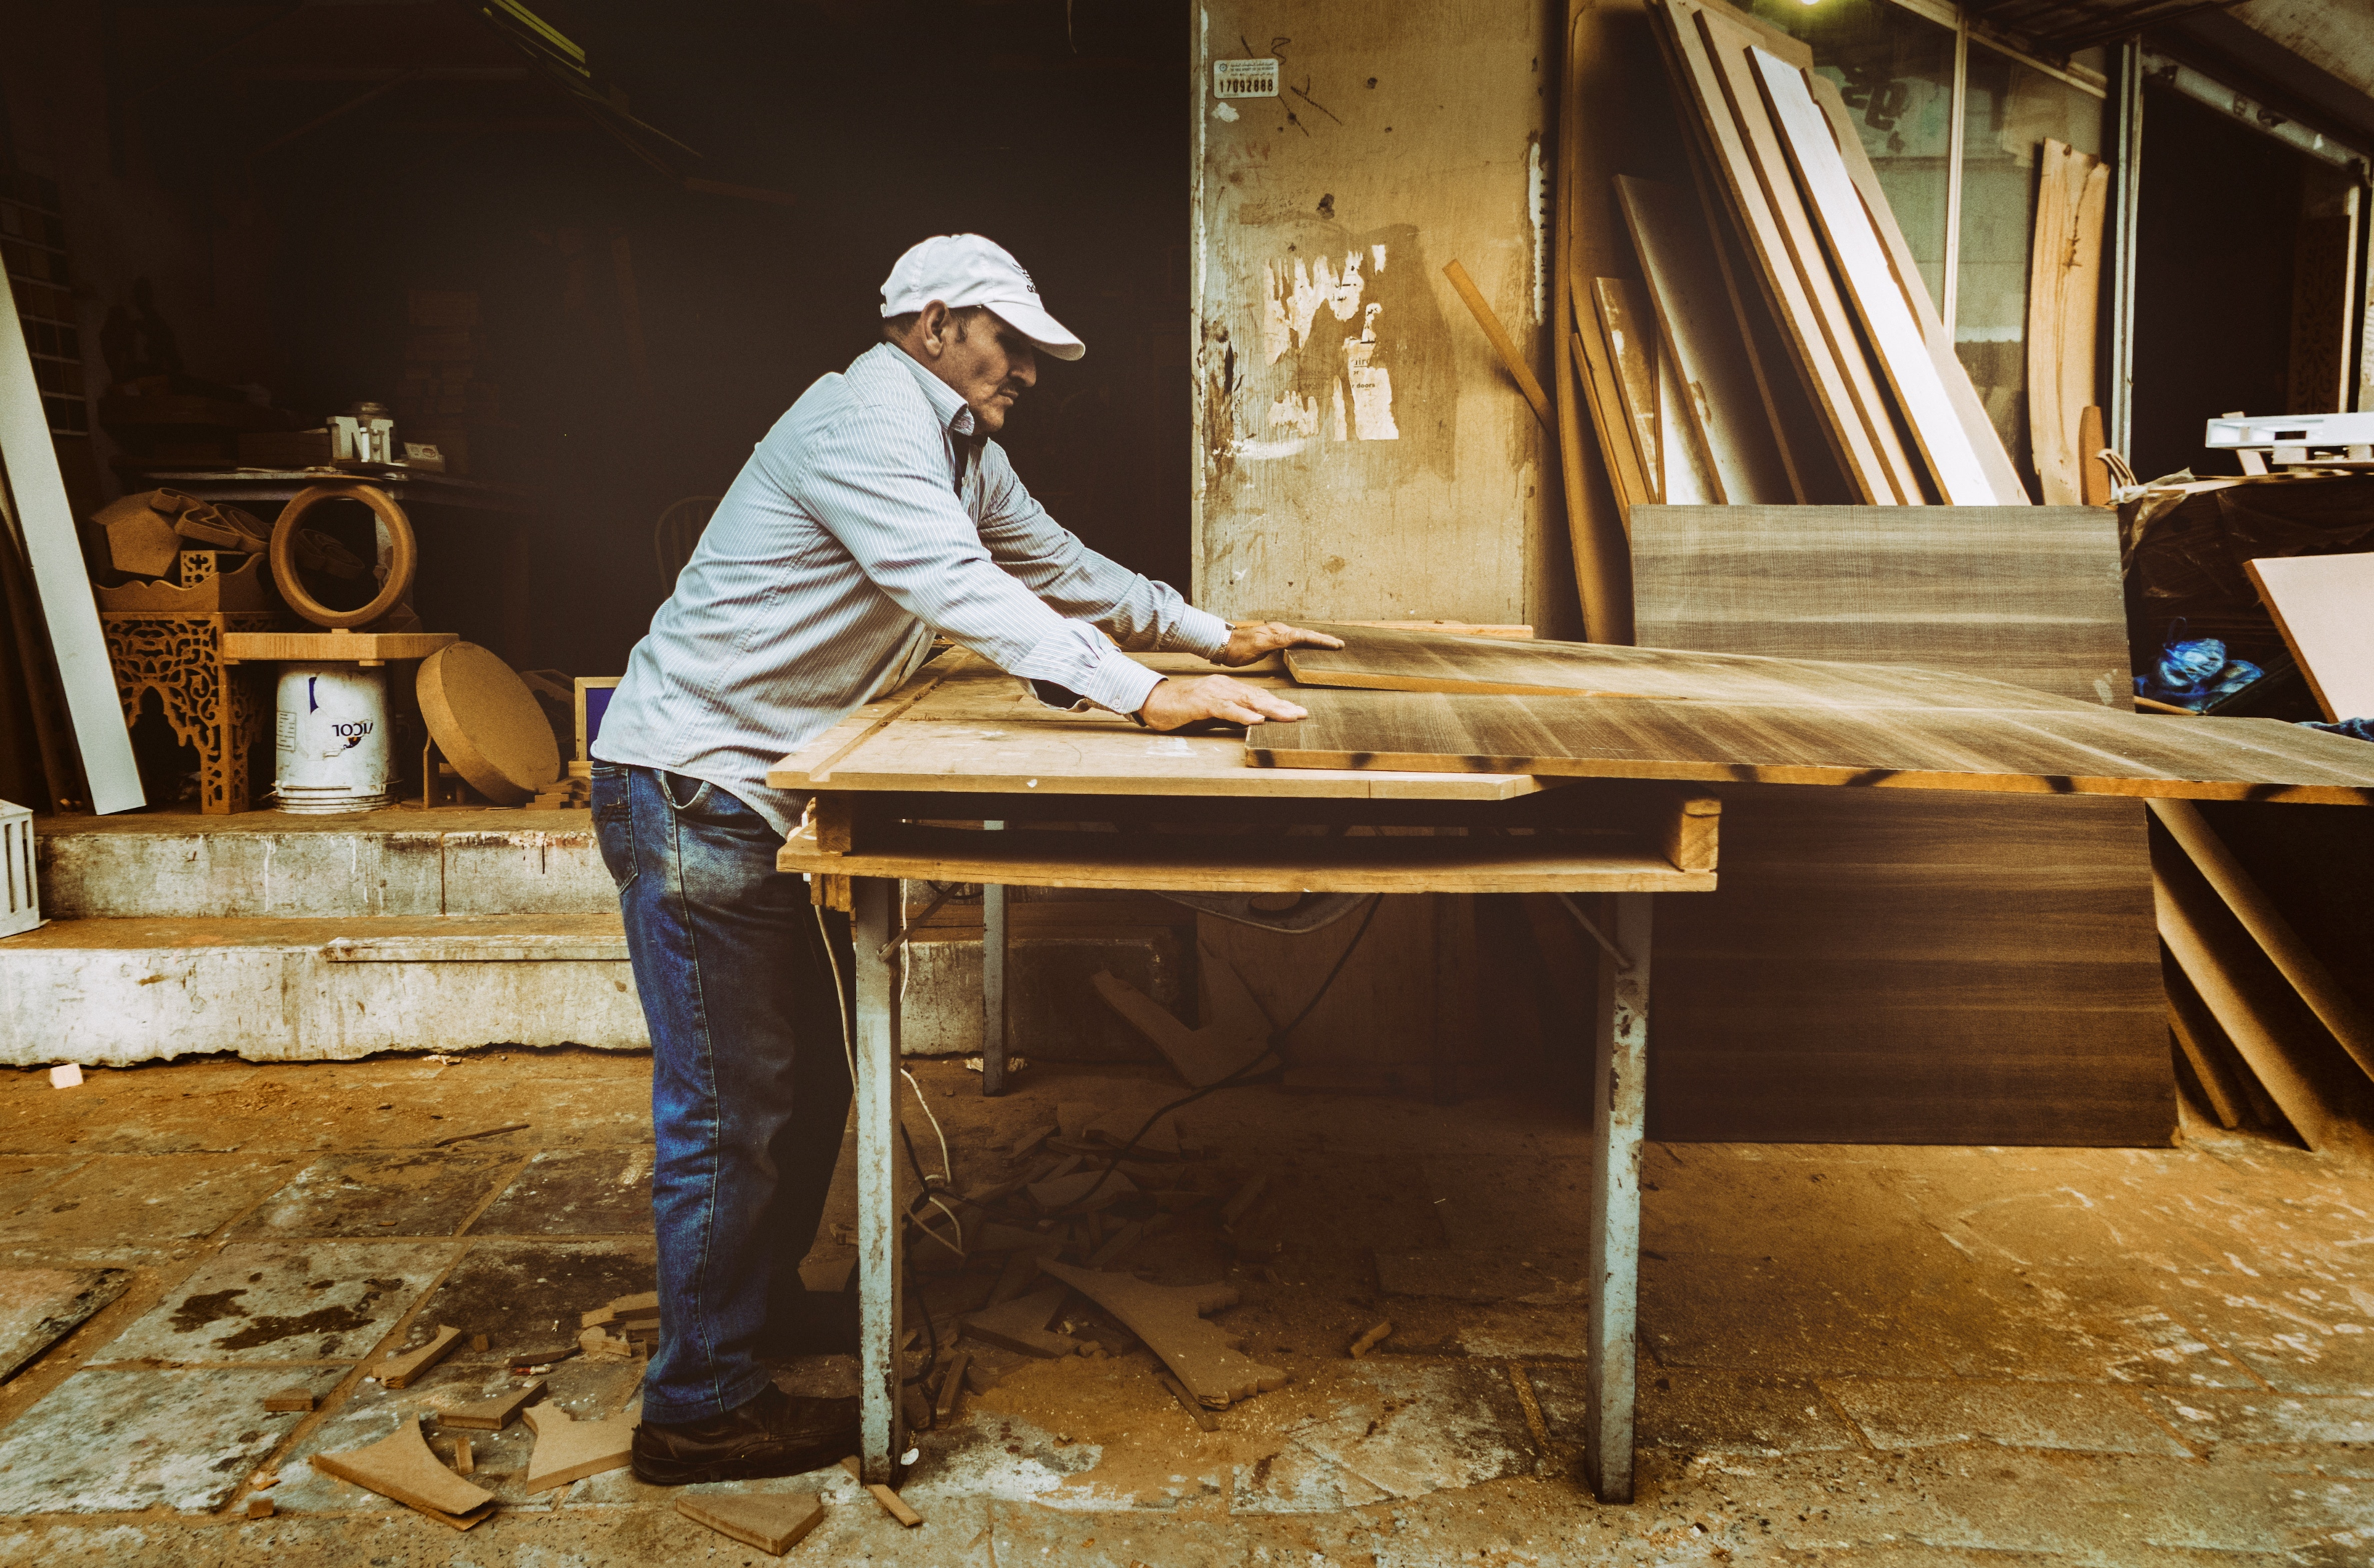 Furniture businesses commonly use woods in their products | Photo by Quintin Gellar from Pexels